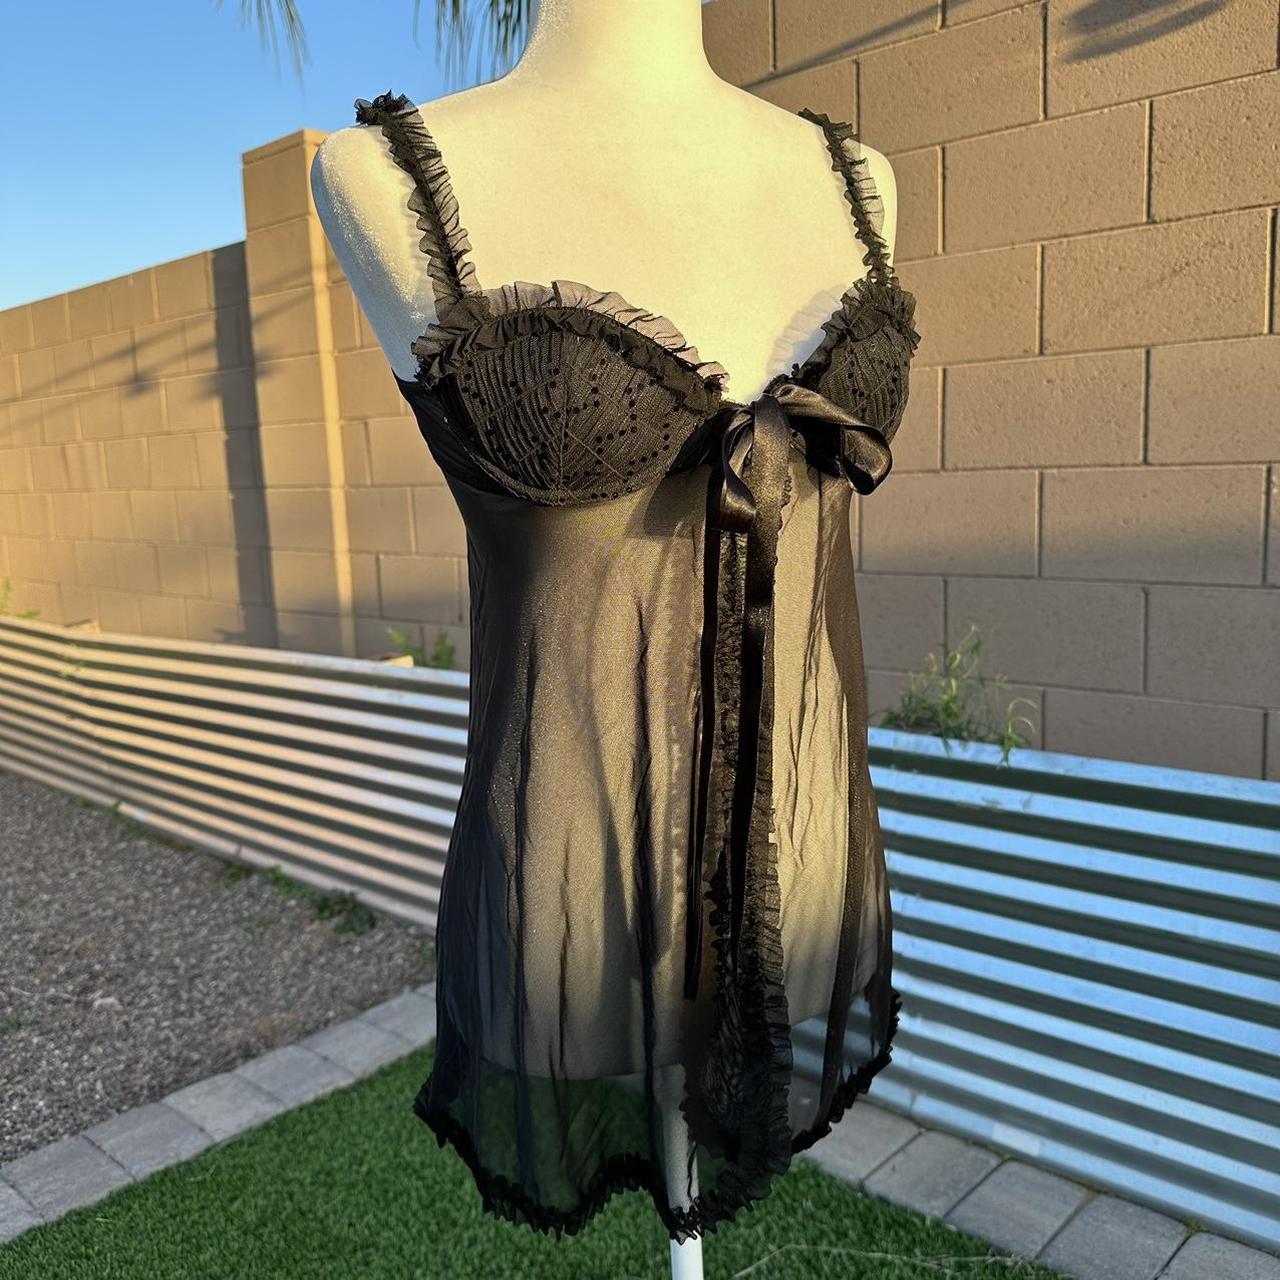 Victoria's Secret sexy little things lacey lingerie teddy in black